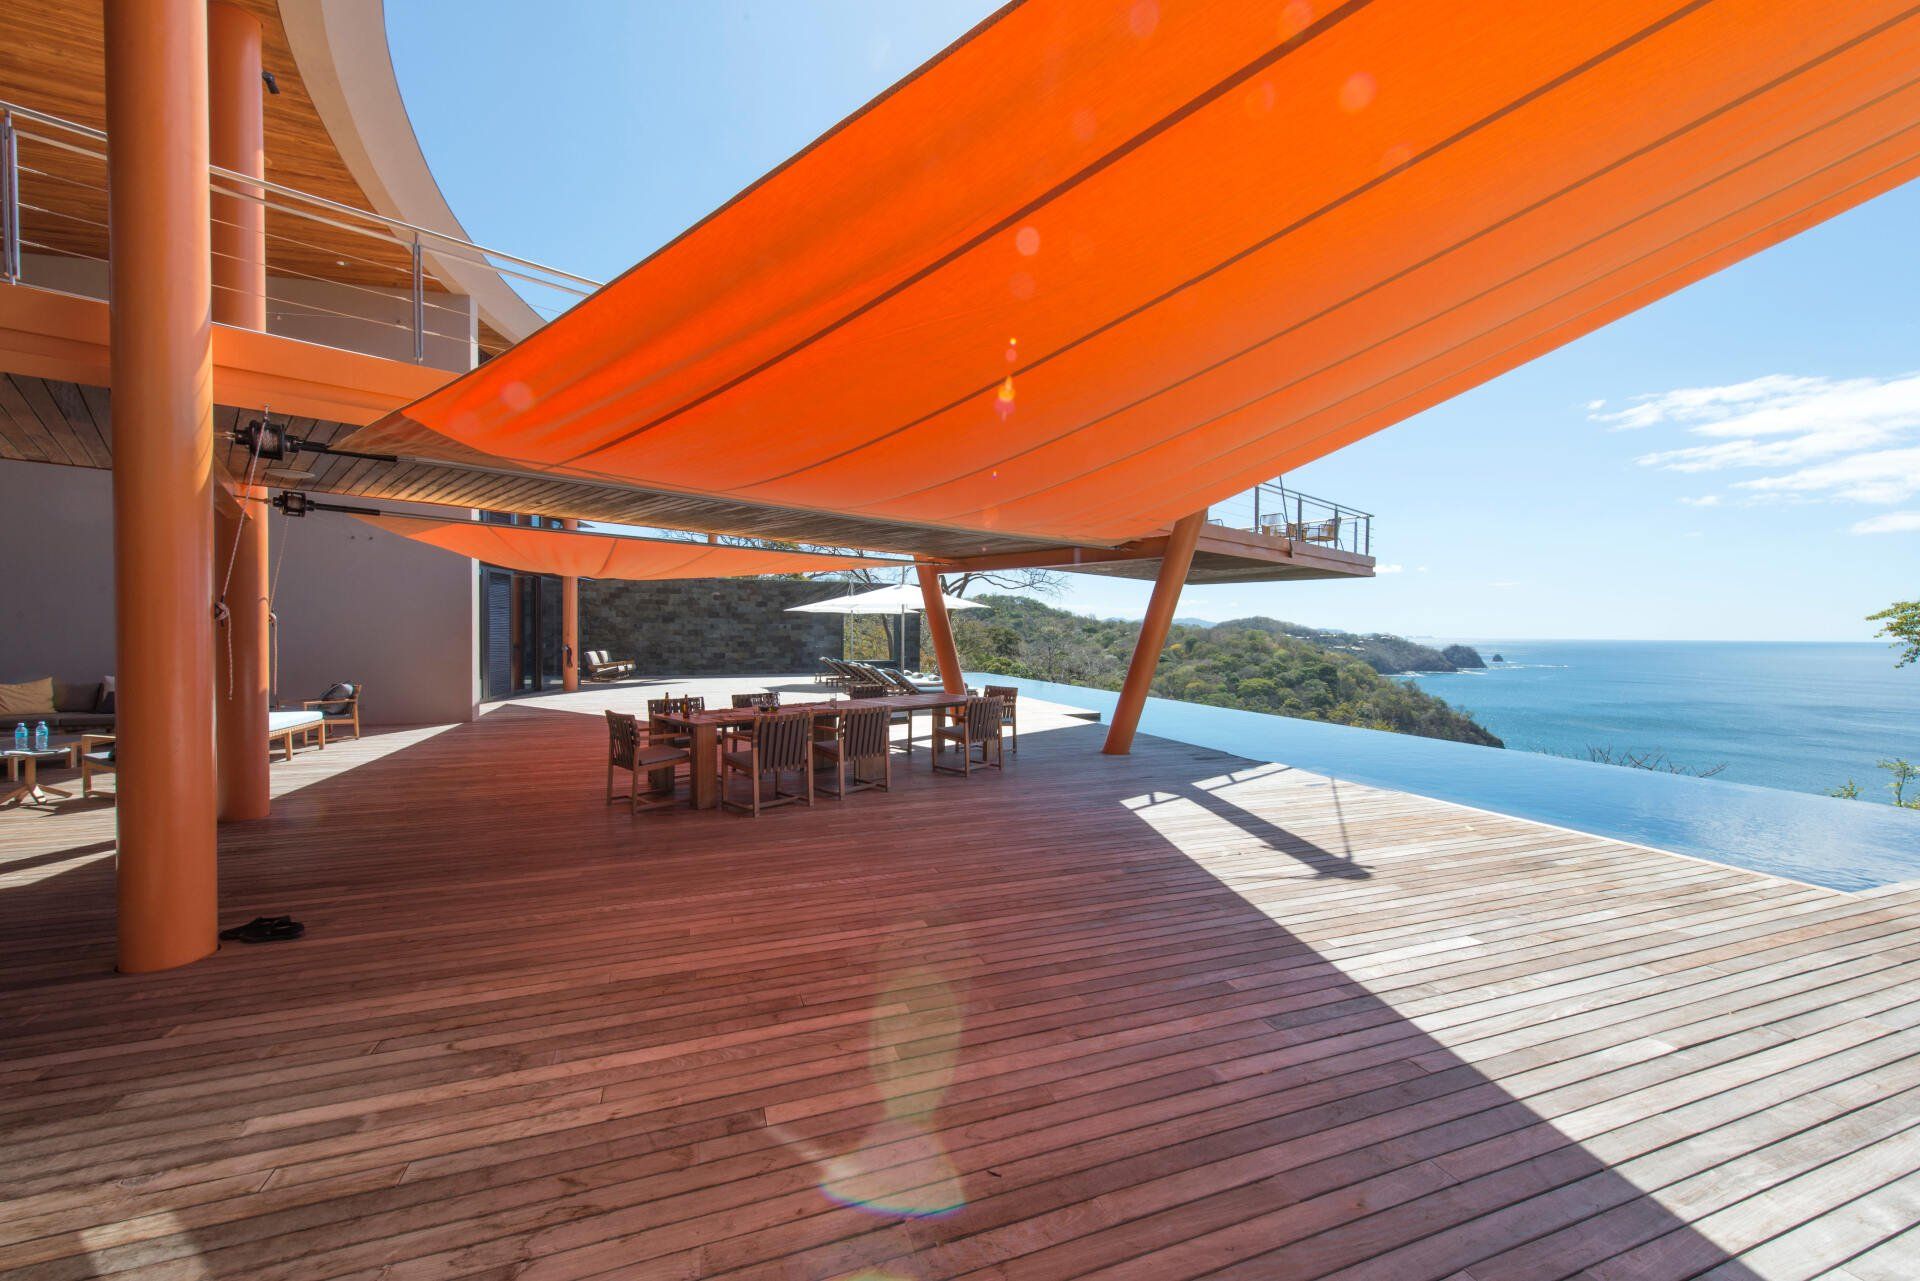 a wooden deck with tables and chairs under an orange umbrella overlooking the ocean .